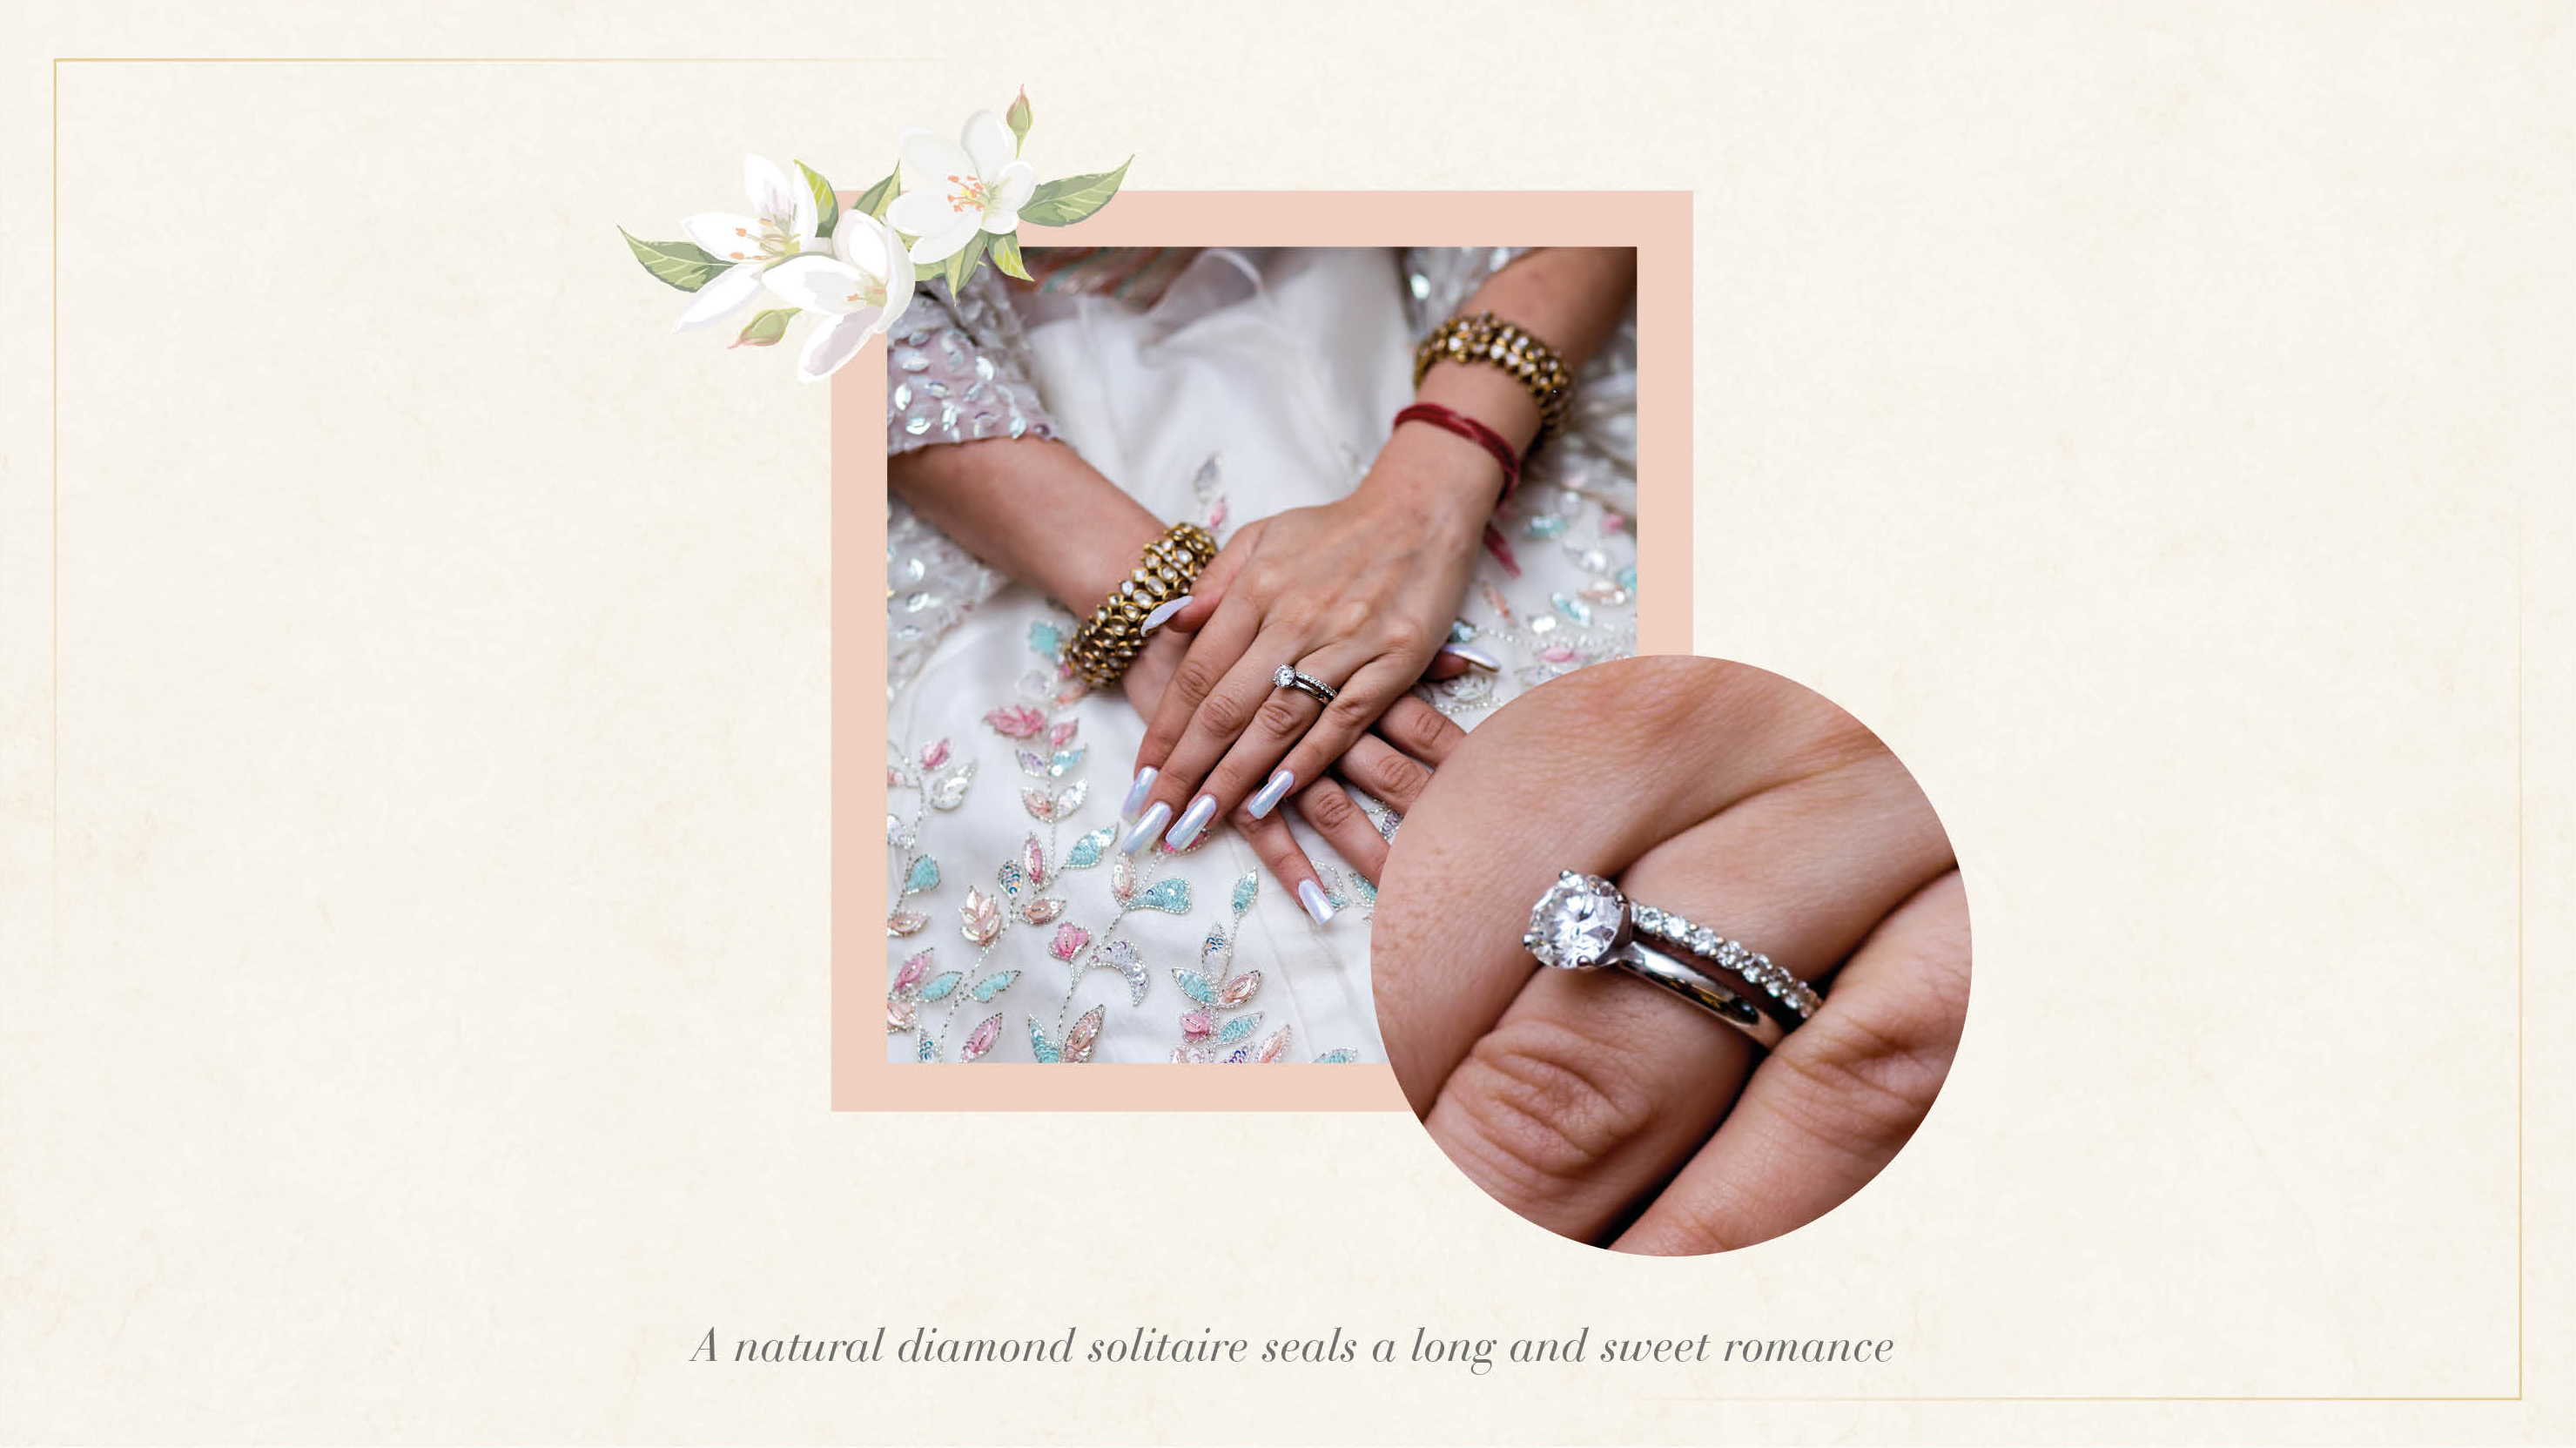 Seal friendships forever with natural diamonds - Only Natural Diamonds